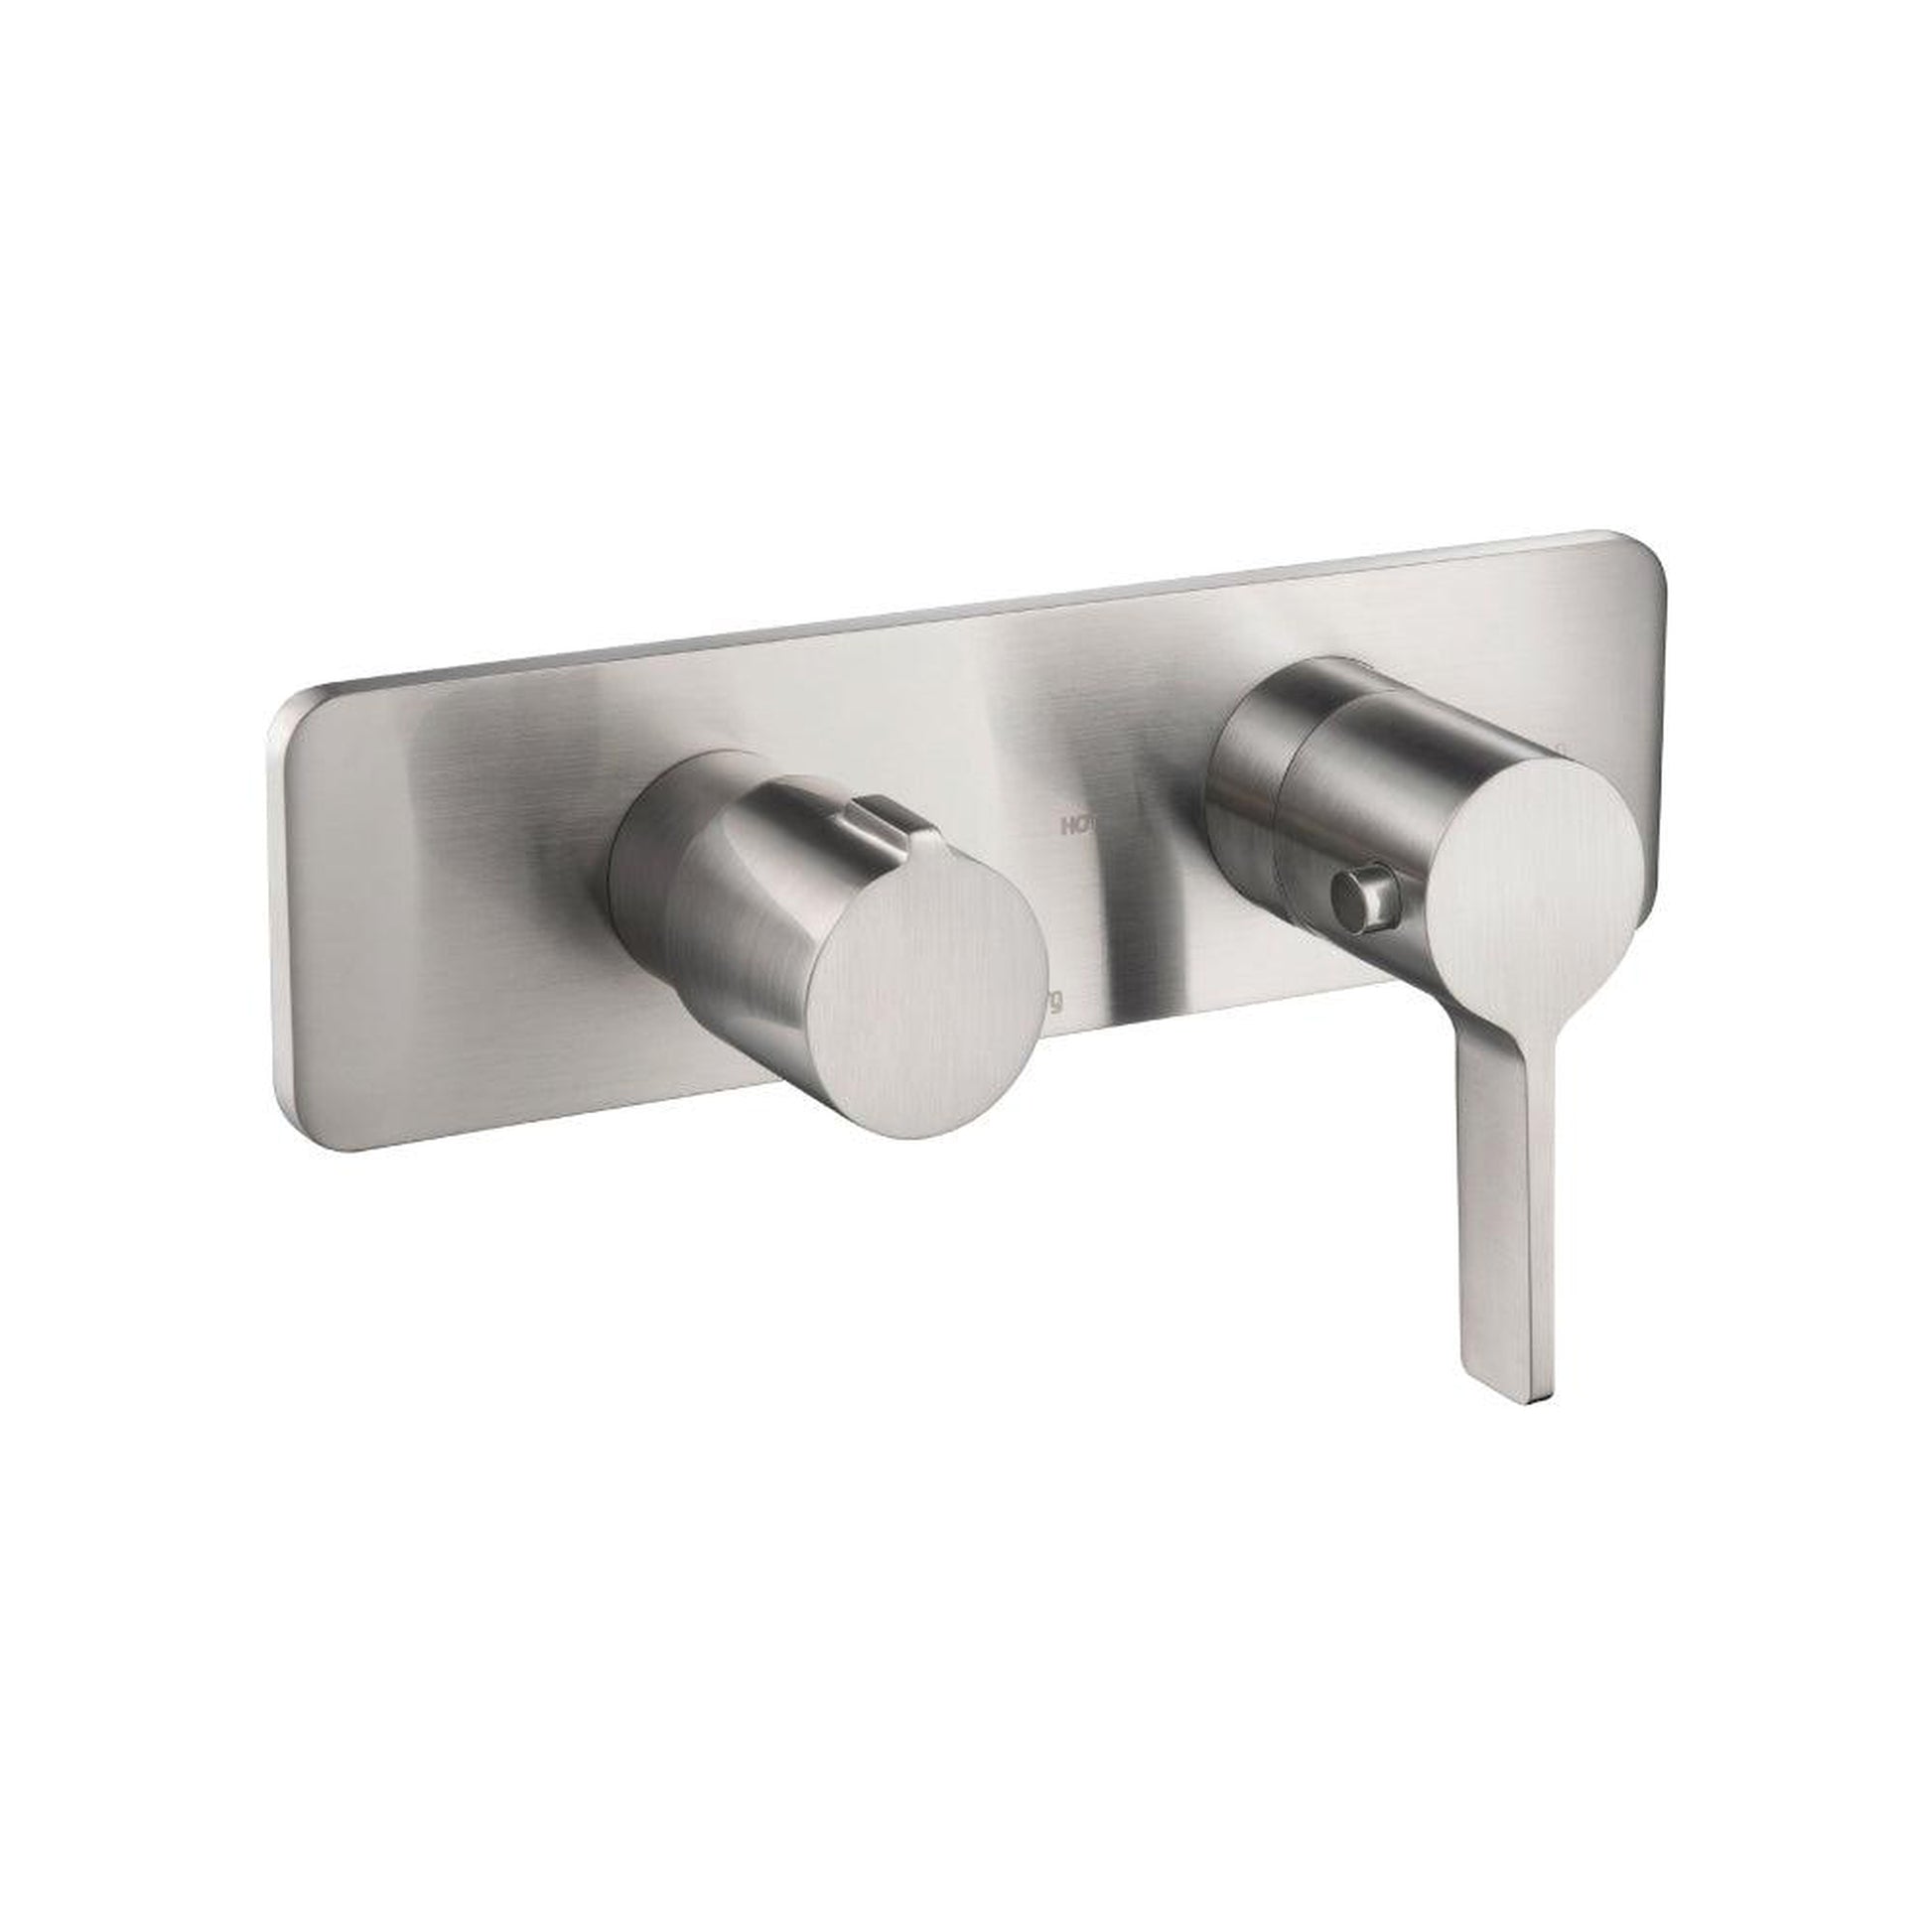 Isenberg Serie 260 3/4" Single Output Horizontal Thermostatic Shower Valve and Trim in Brushed Nickel (260.2693BN)